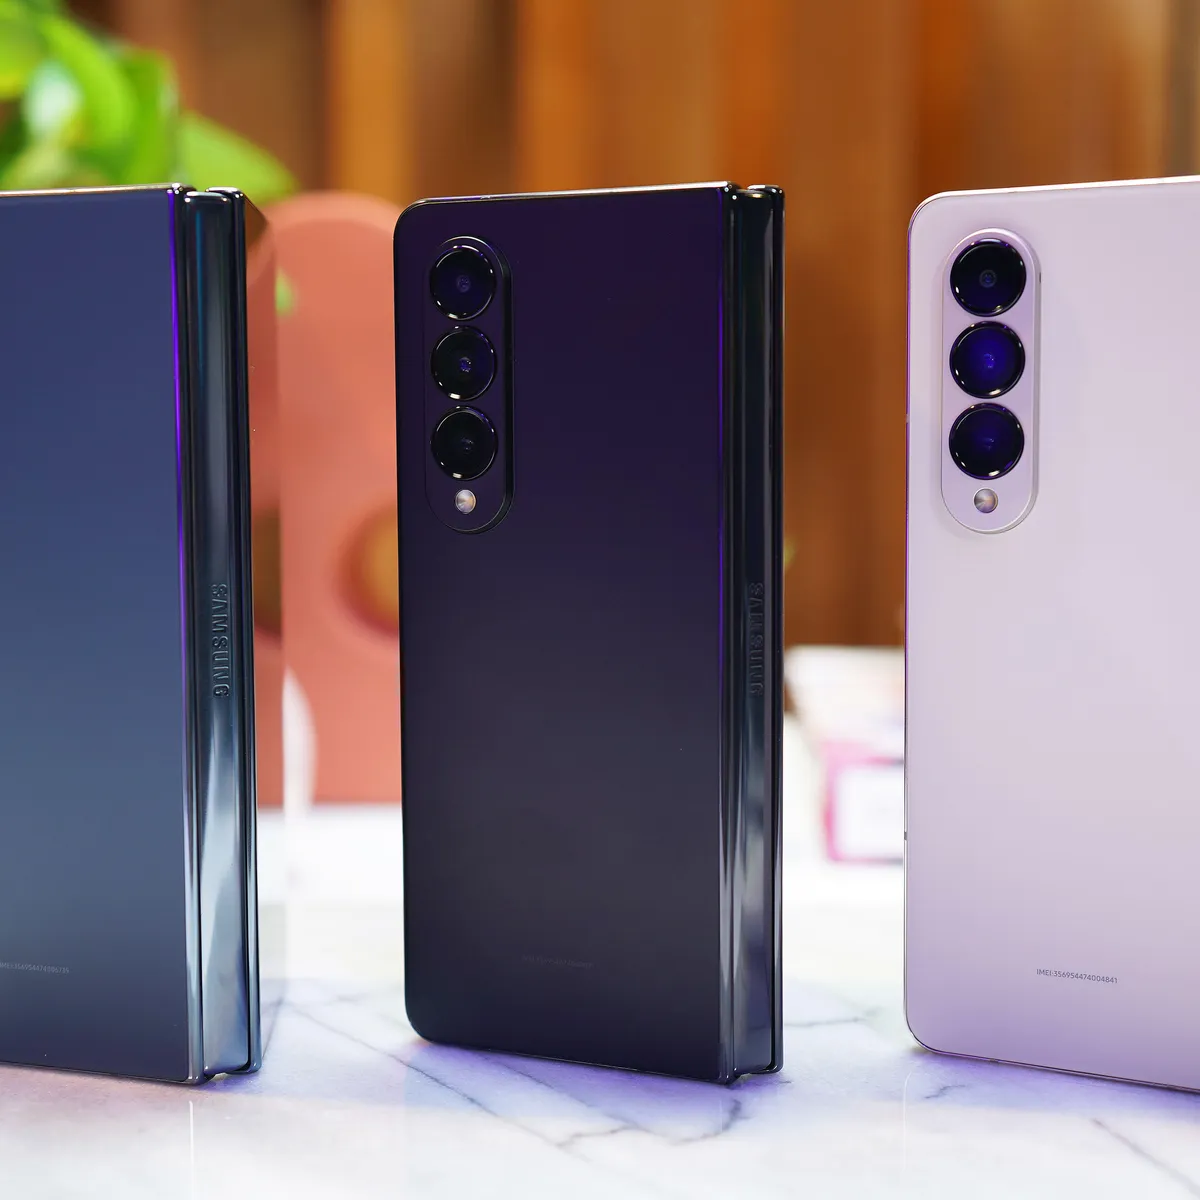 The Galaxy Z Fold 4 available colors